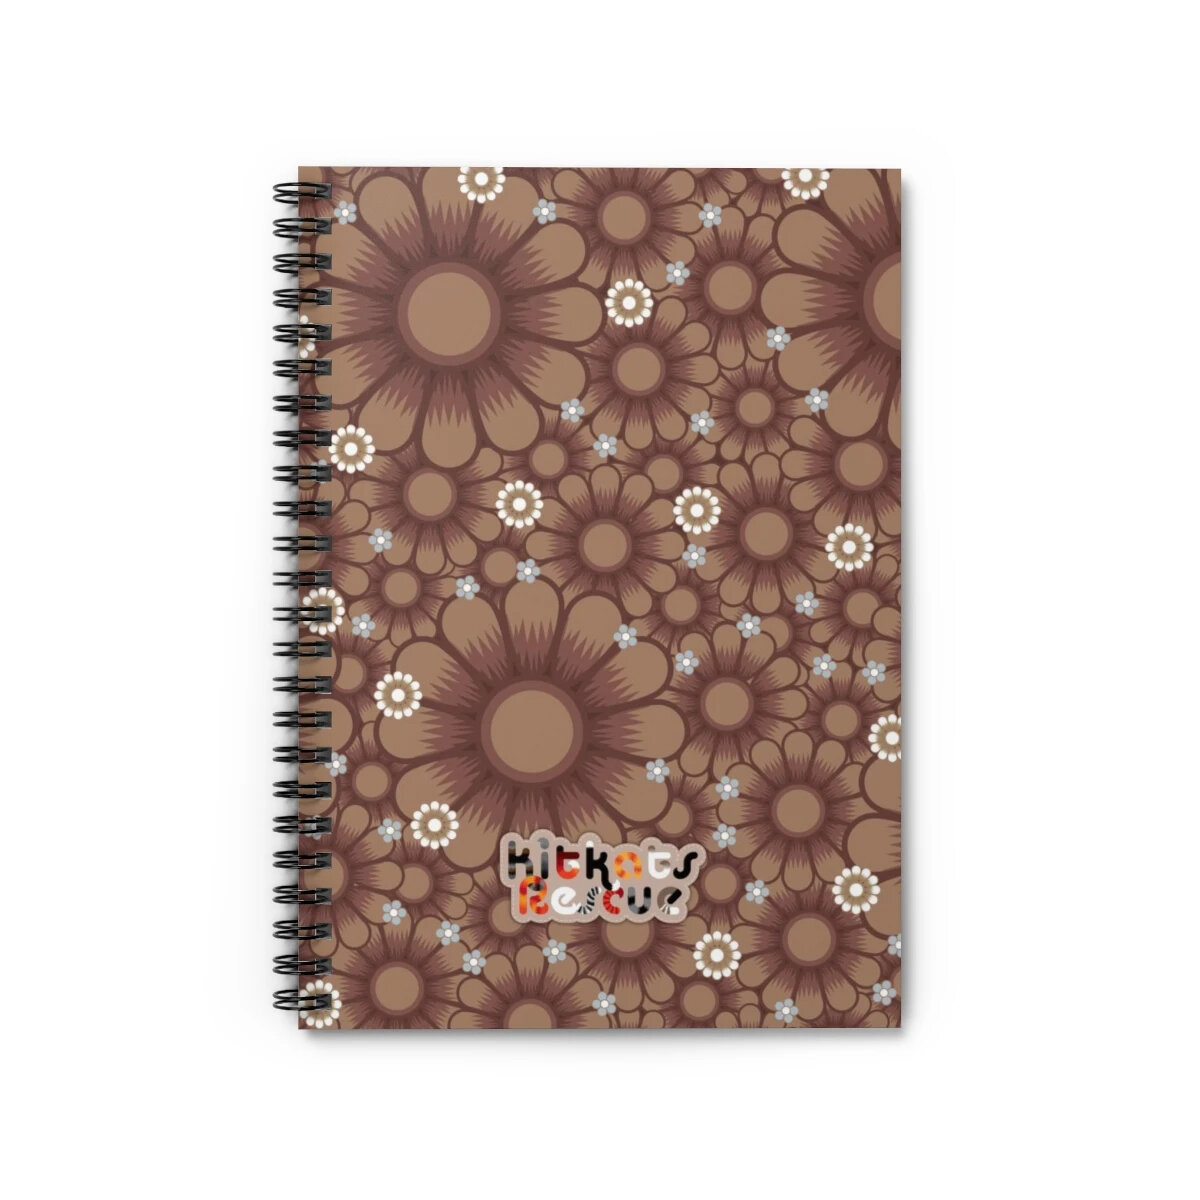 KitKats Rescue . Taupe Flower Bed Spiral Notebook 